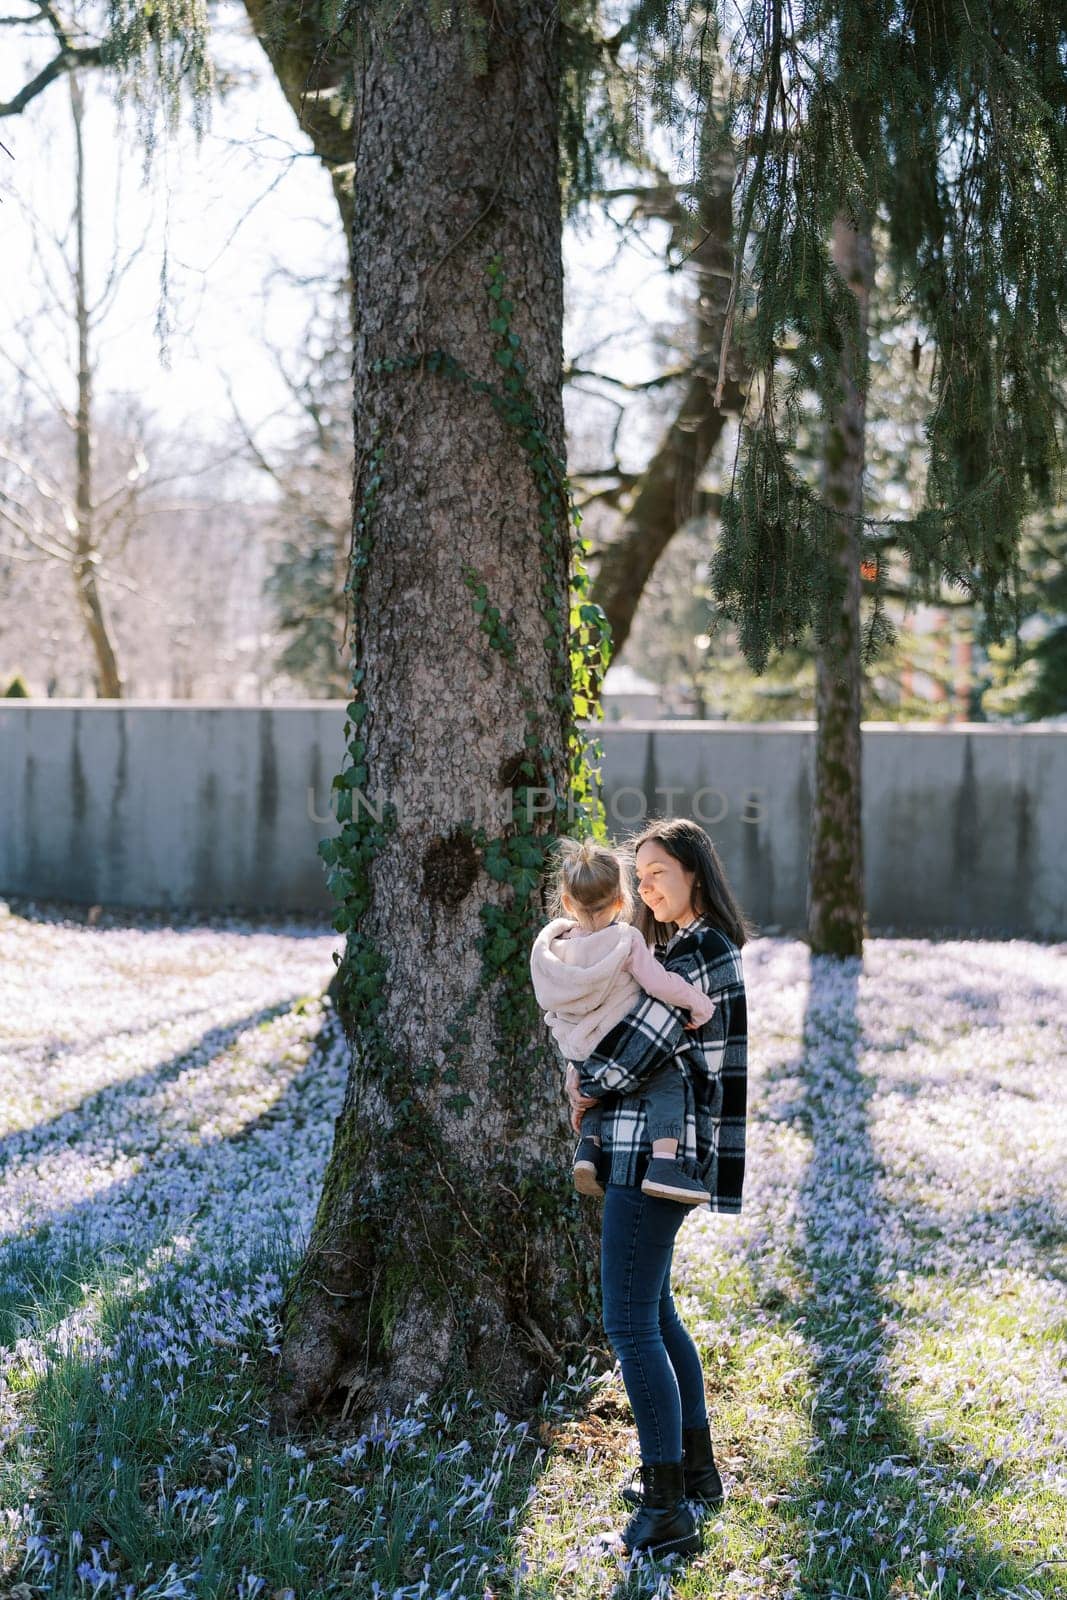 Mom with a little girl in her arms stands near an ivy-covered tree in the park by Nadtochiy